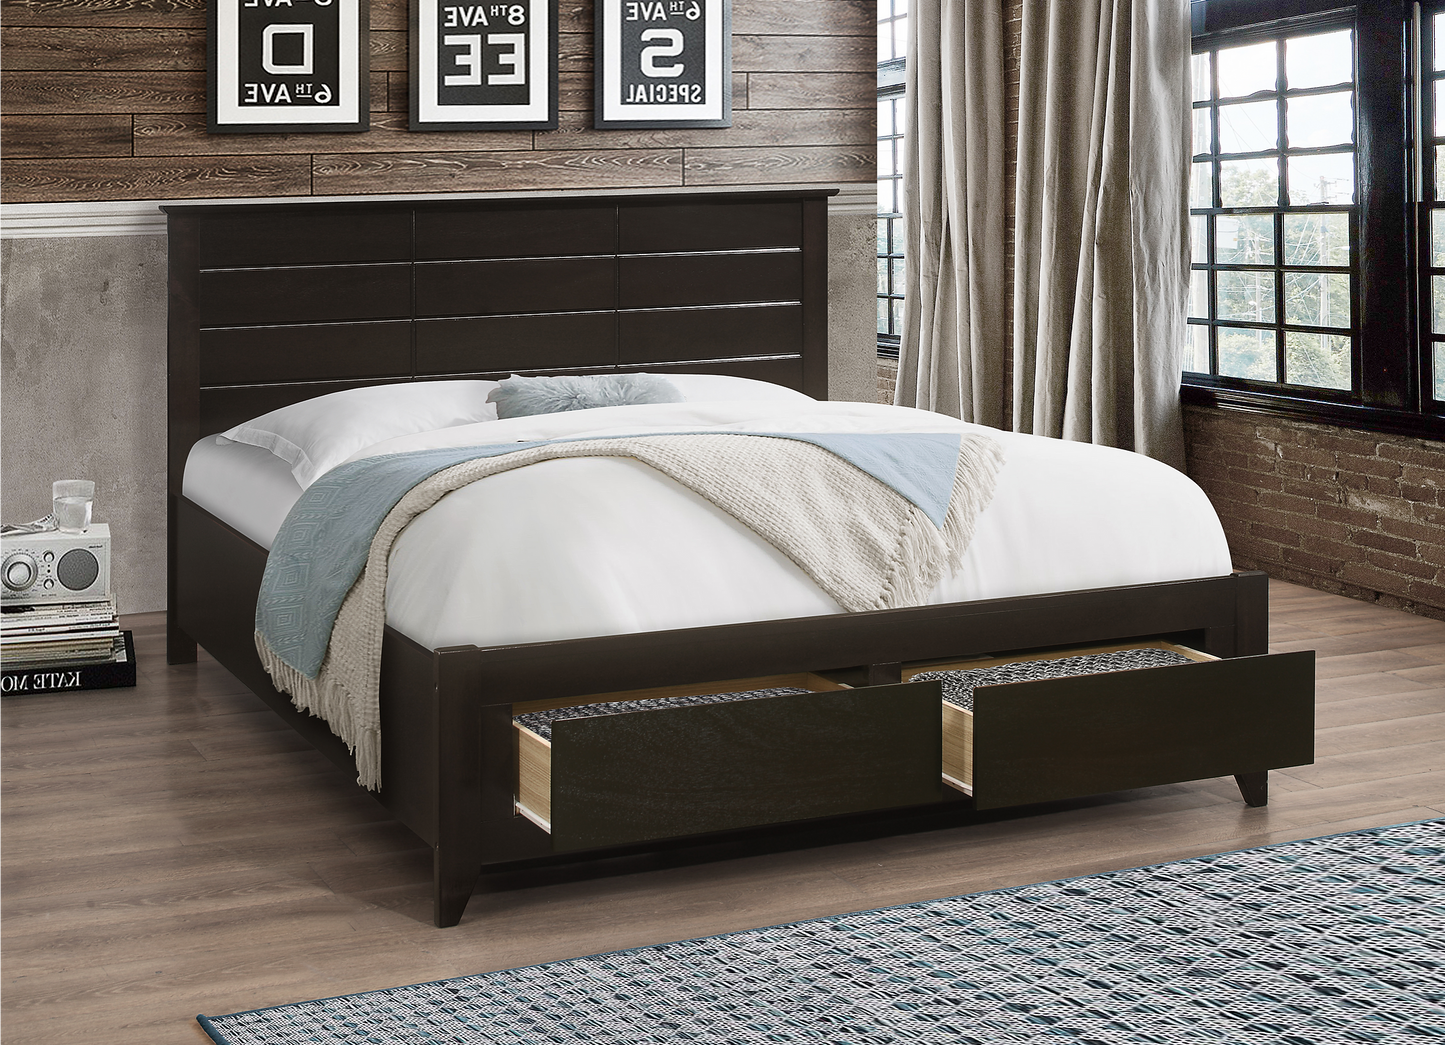 Modern Wood Panel Bed Frame with Footboard Storage Drawers